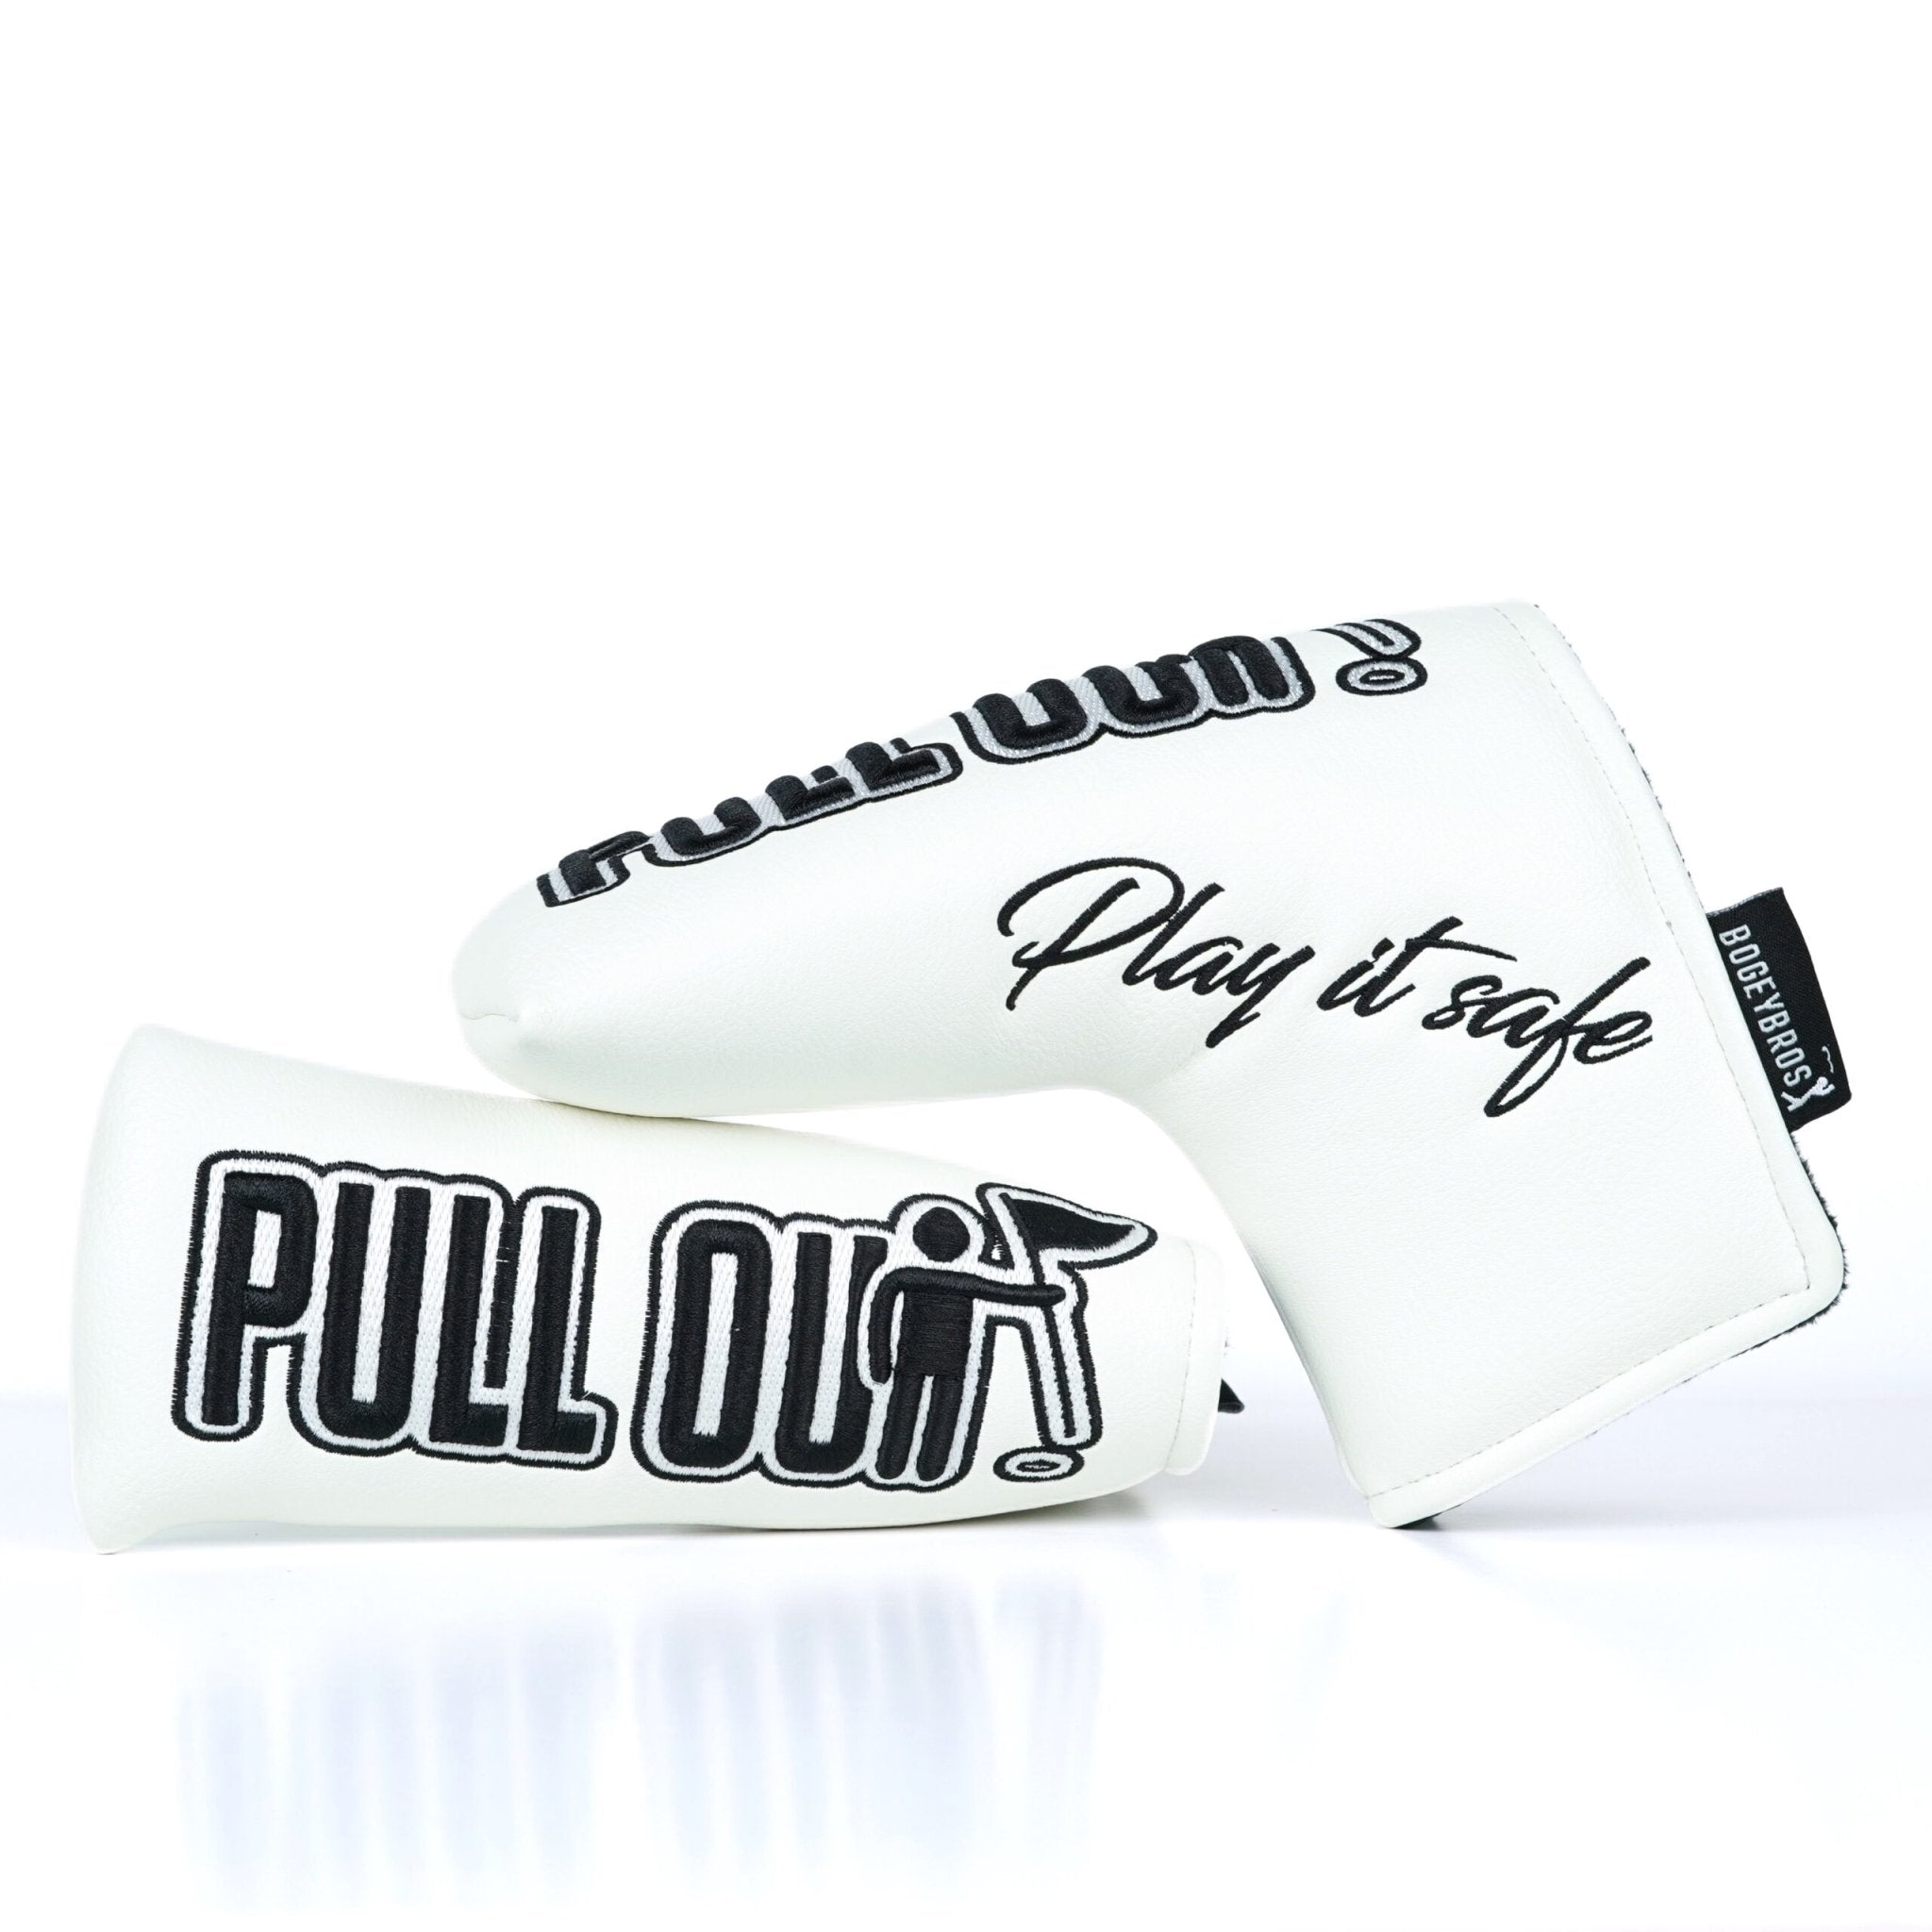 PULL OUT - Blade Putter Headcover - bogeybros-new